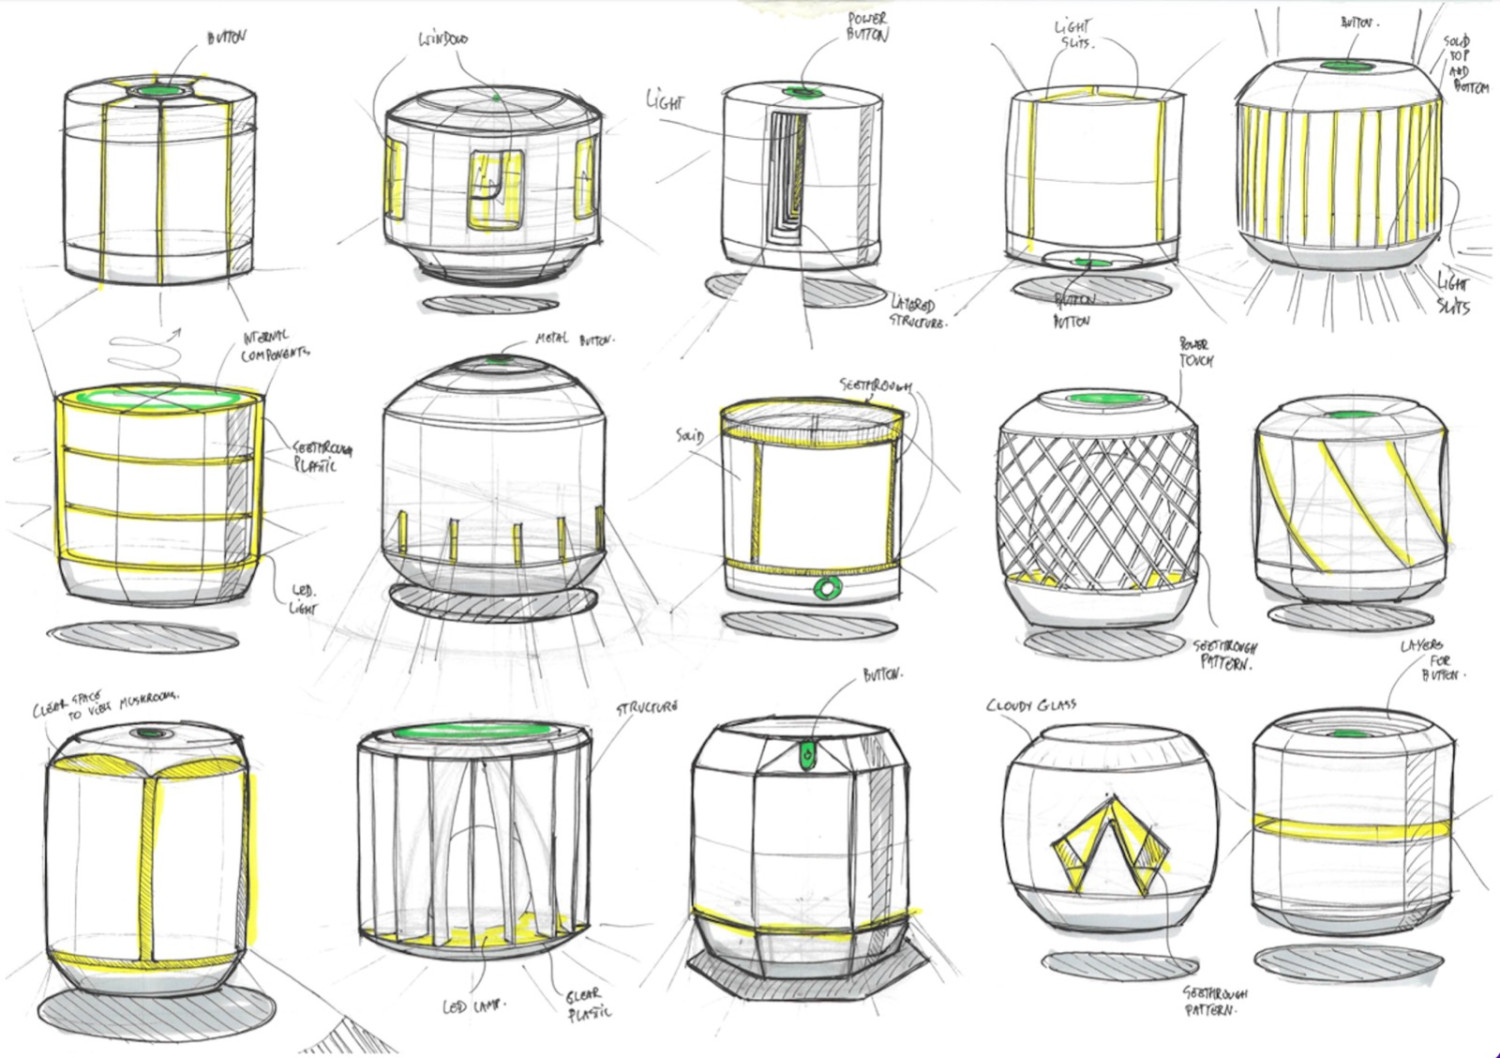 Determining lamp shape – There were many different shapes but the cylinder proved to be most useful